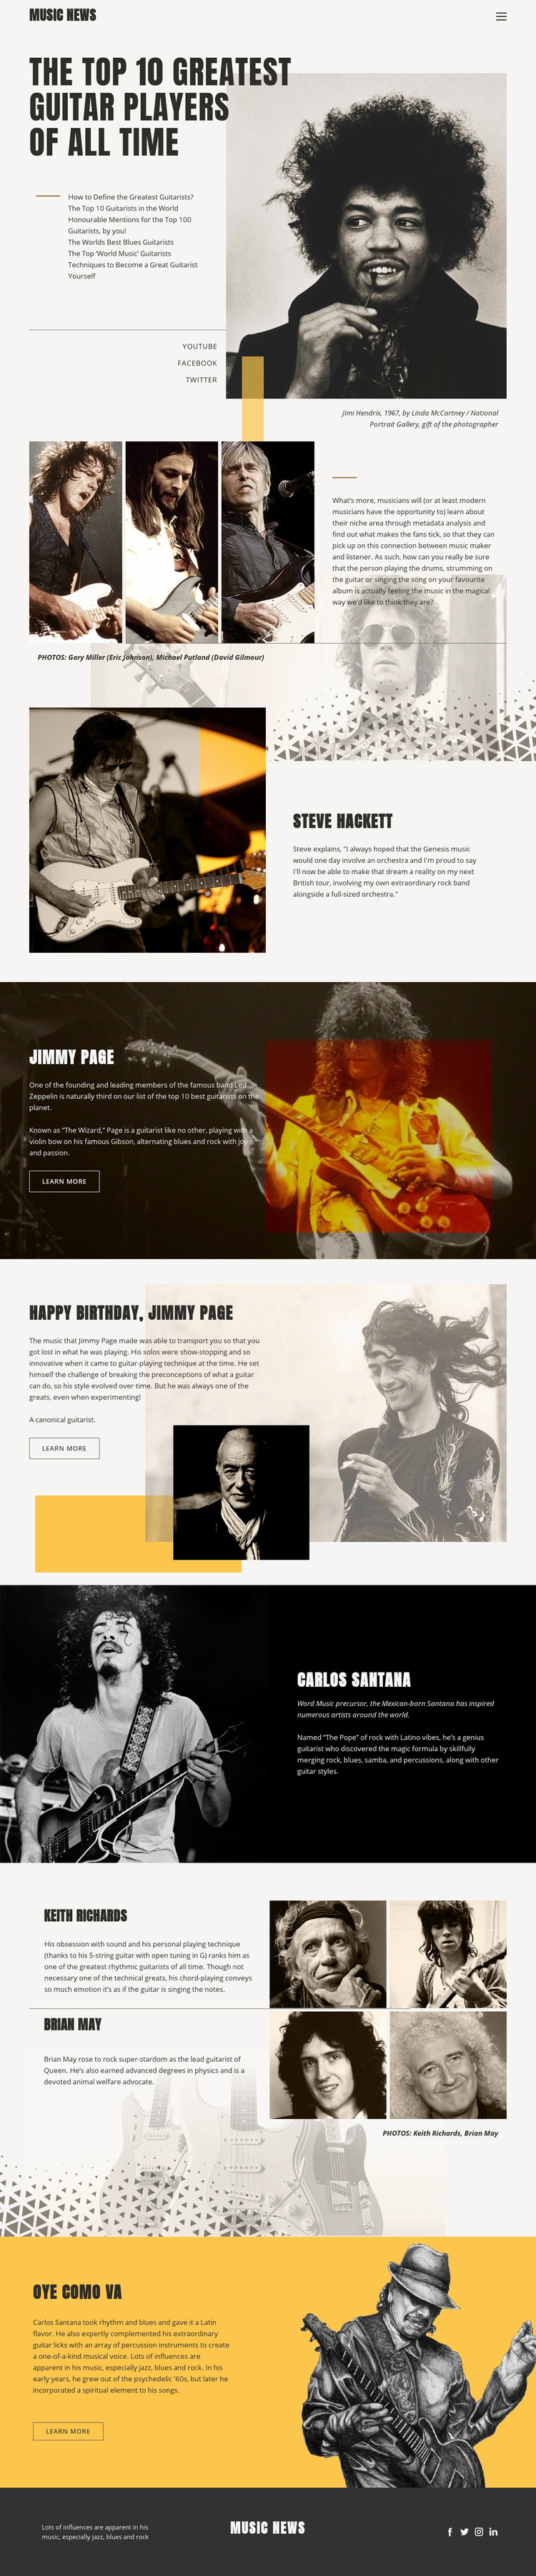 The Top Guitar Players Web Page Design